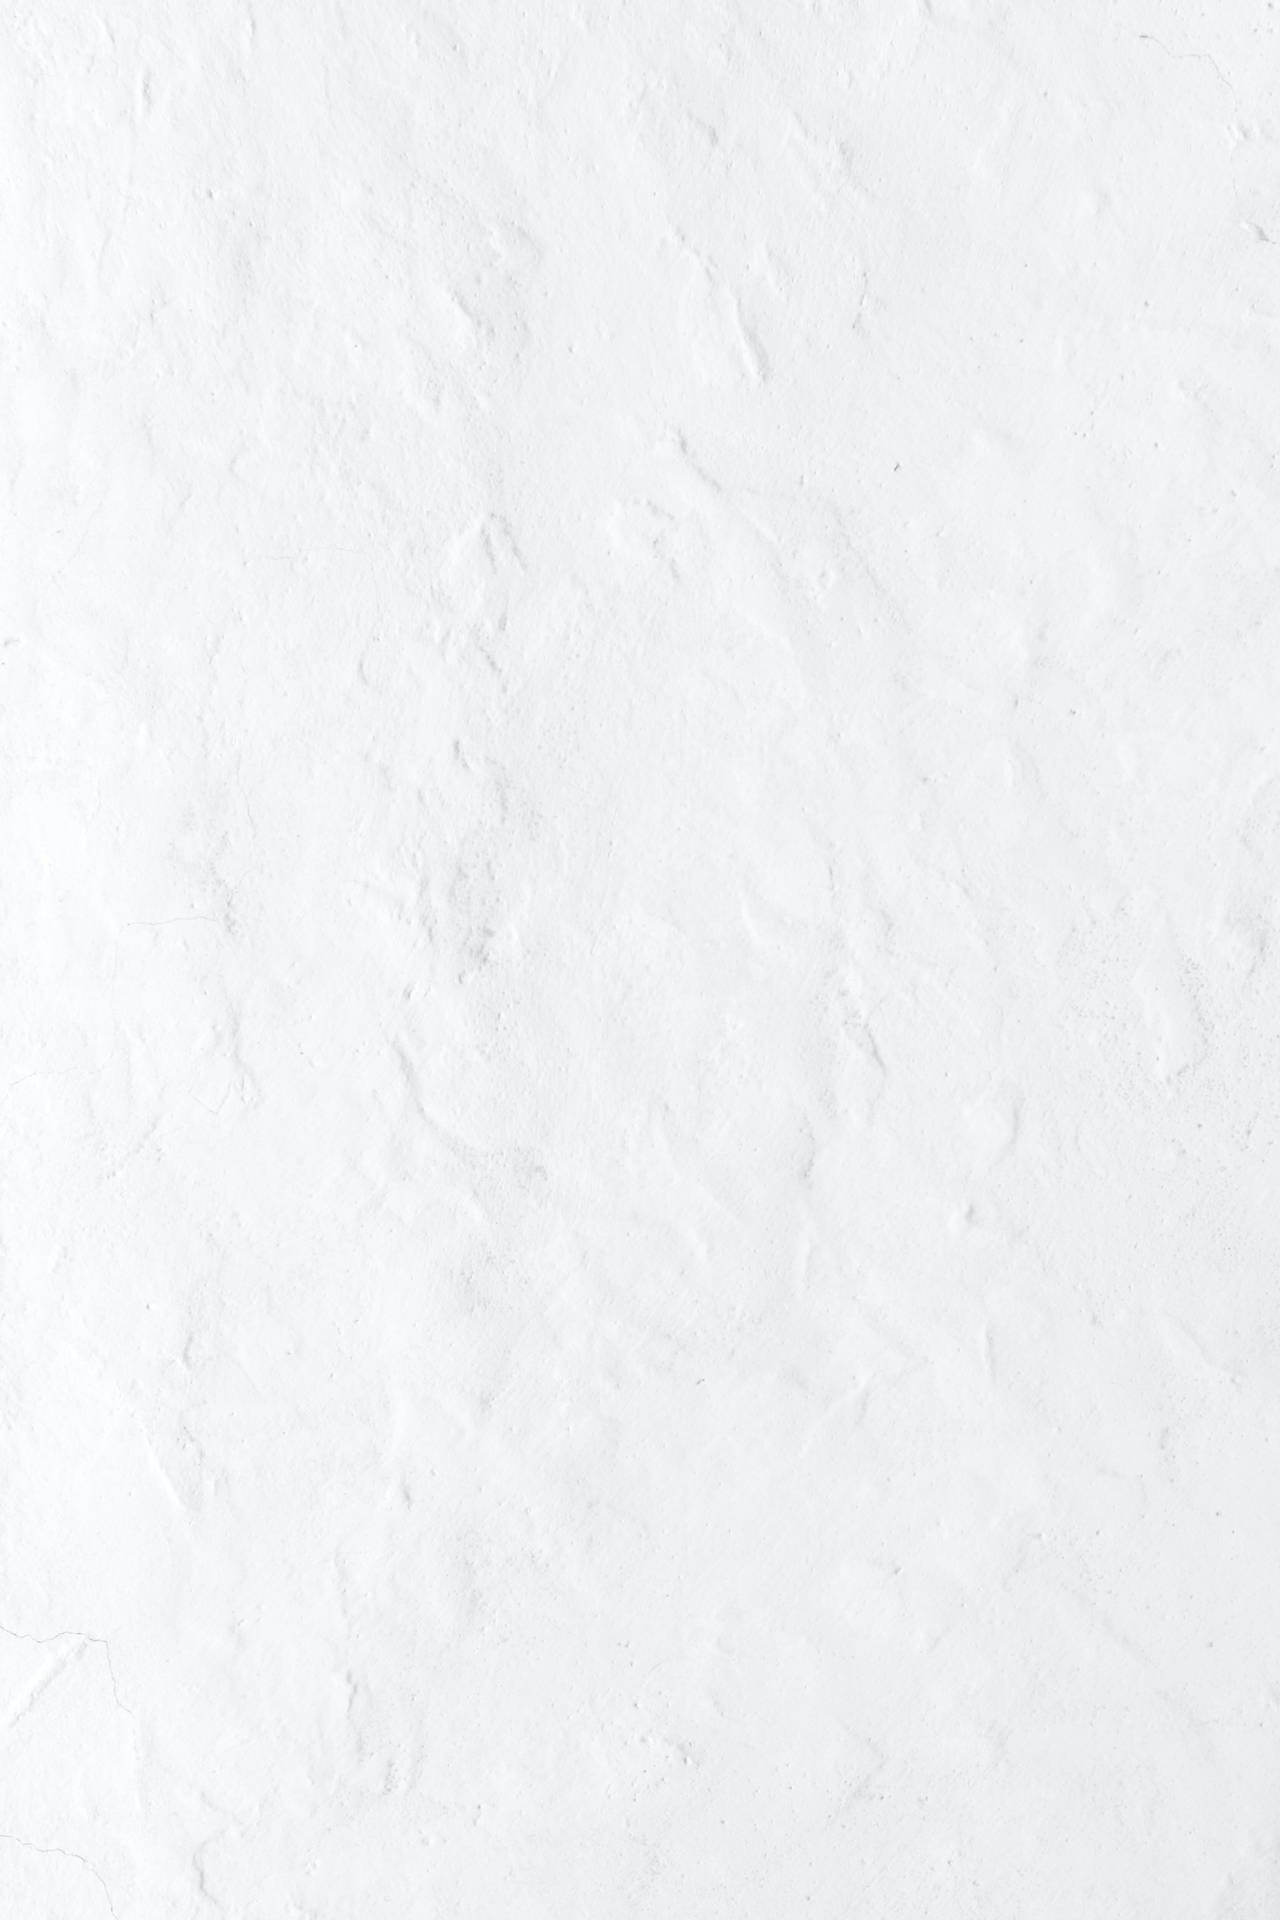 Solid White Snow Path Background